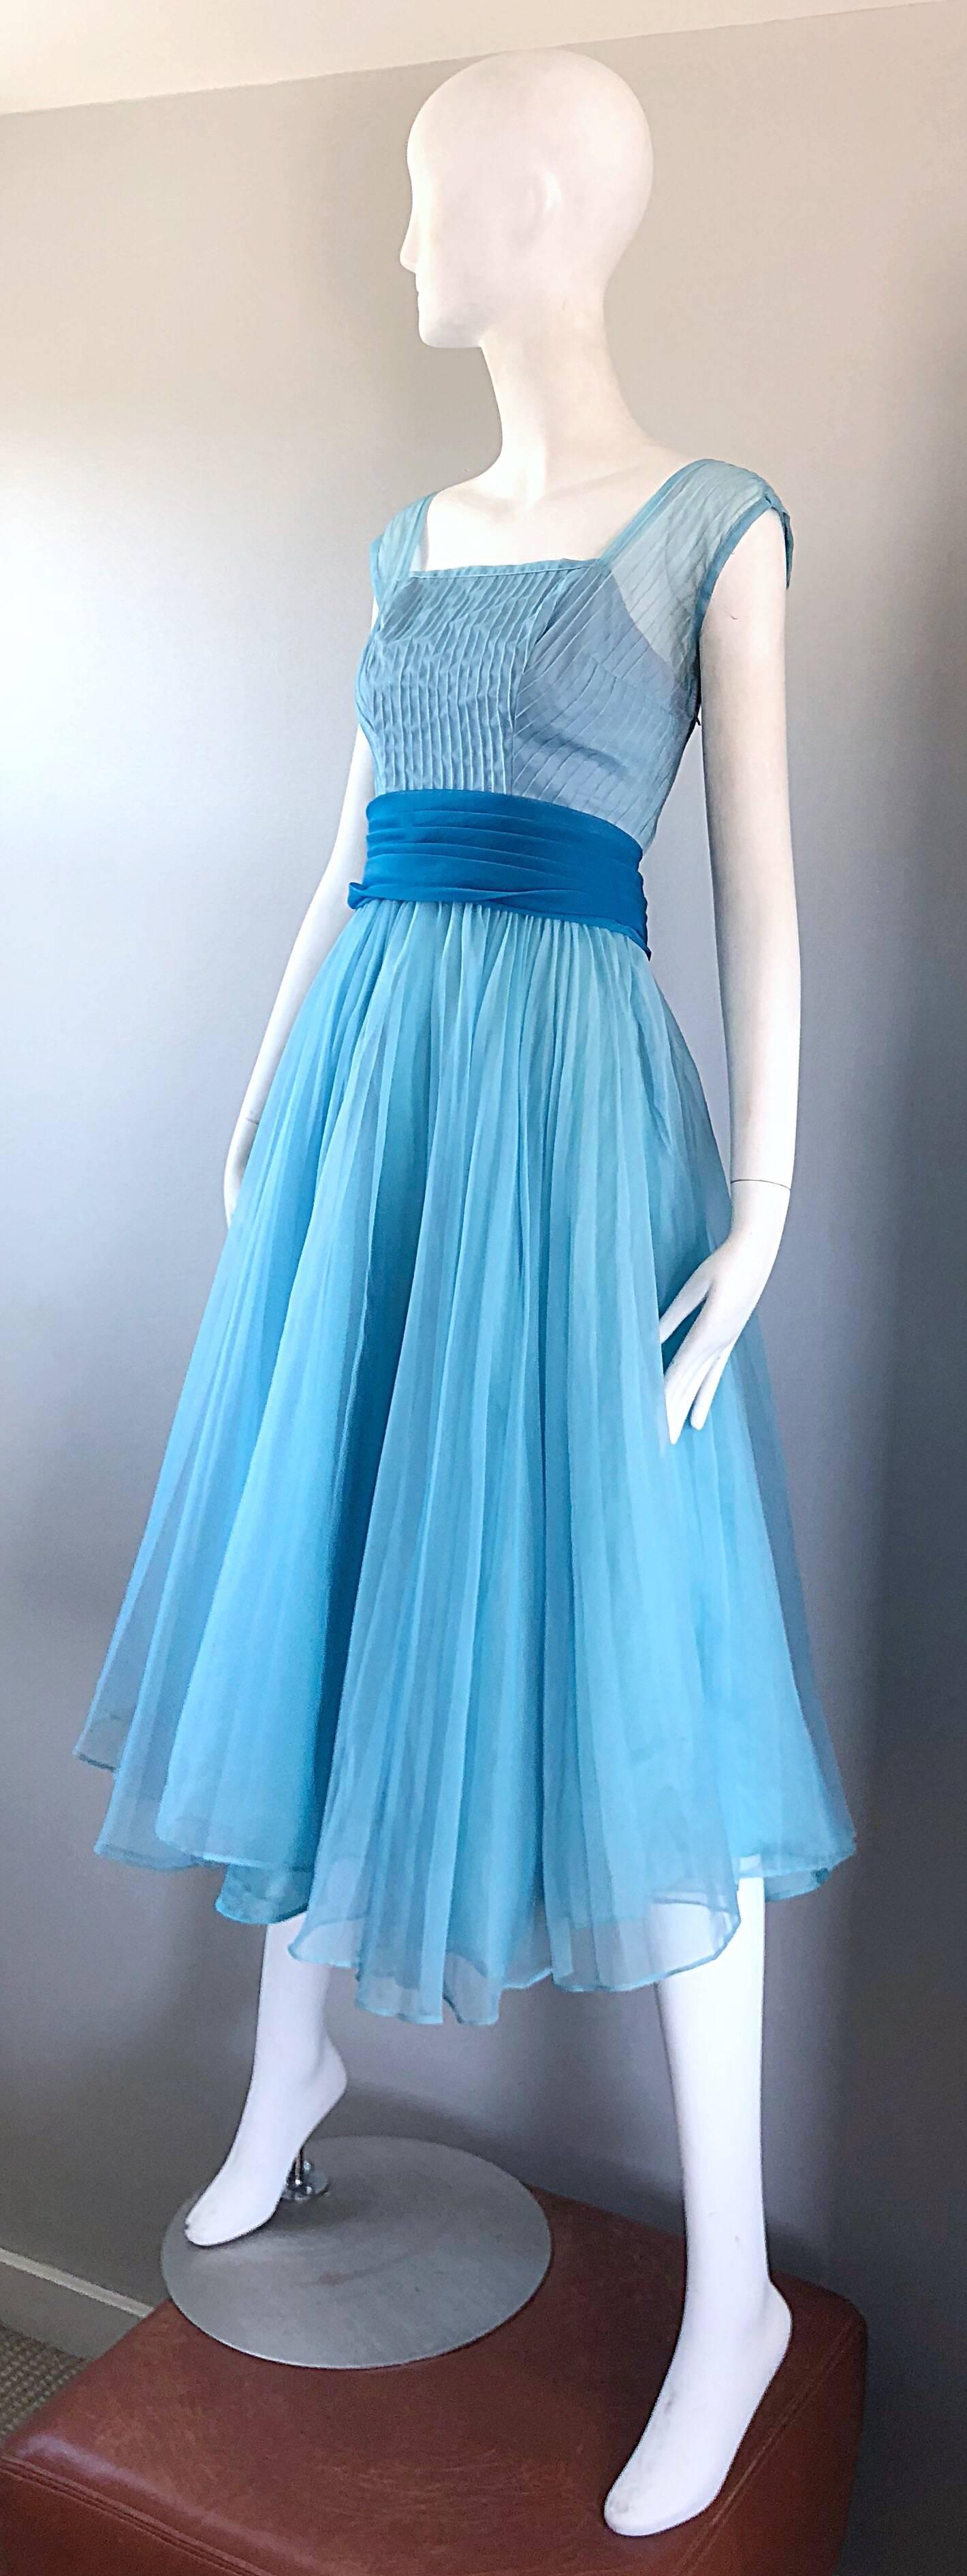 Women's 1950s Fred Perlberg Beautiful Robins Egg Blue Fit n' Flare Vintage 50s Dress For Sale